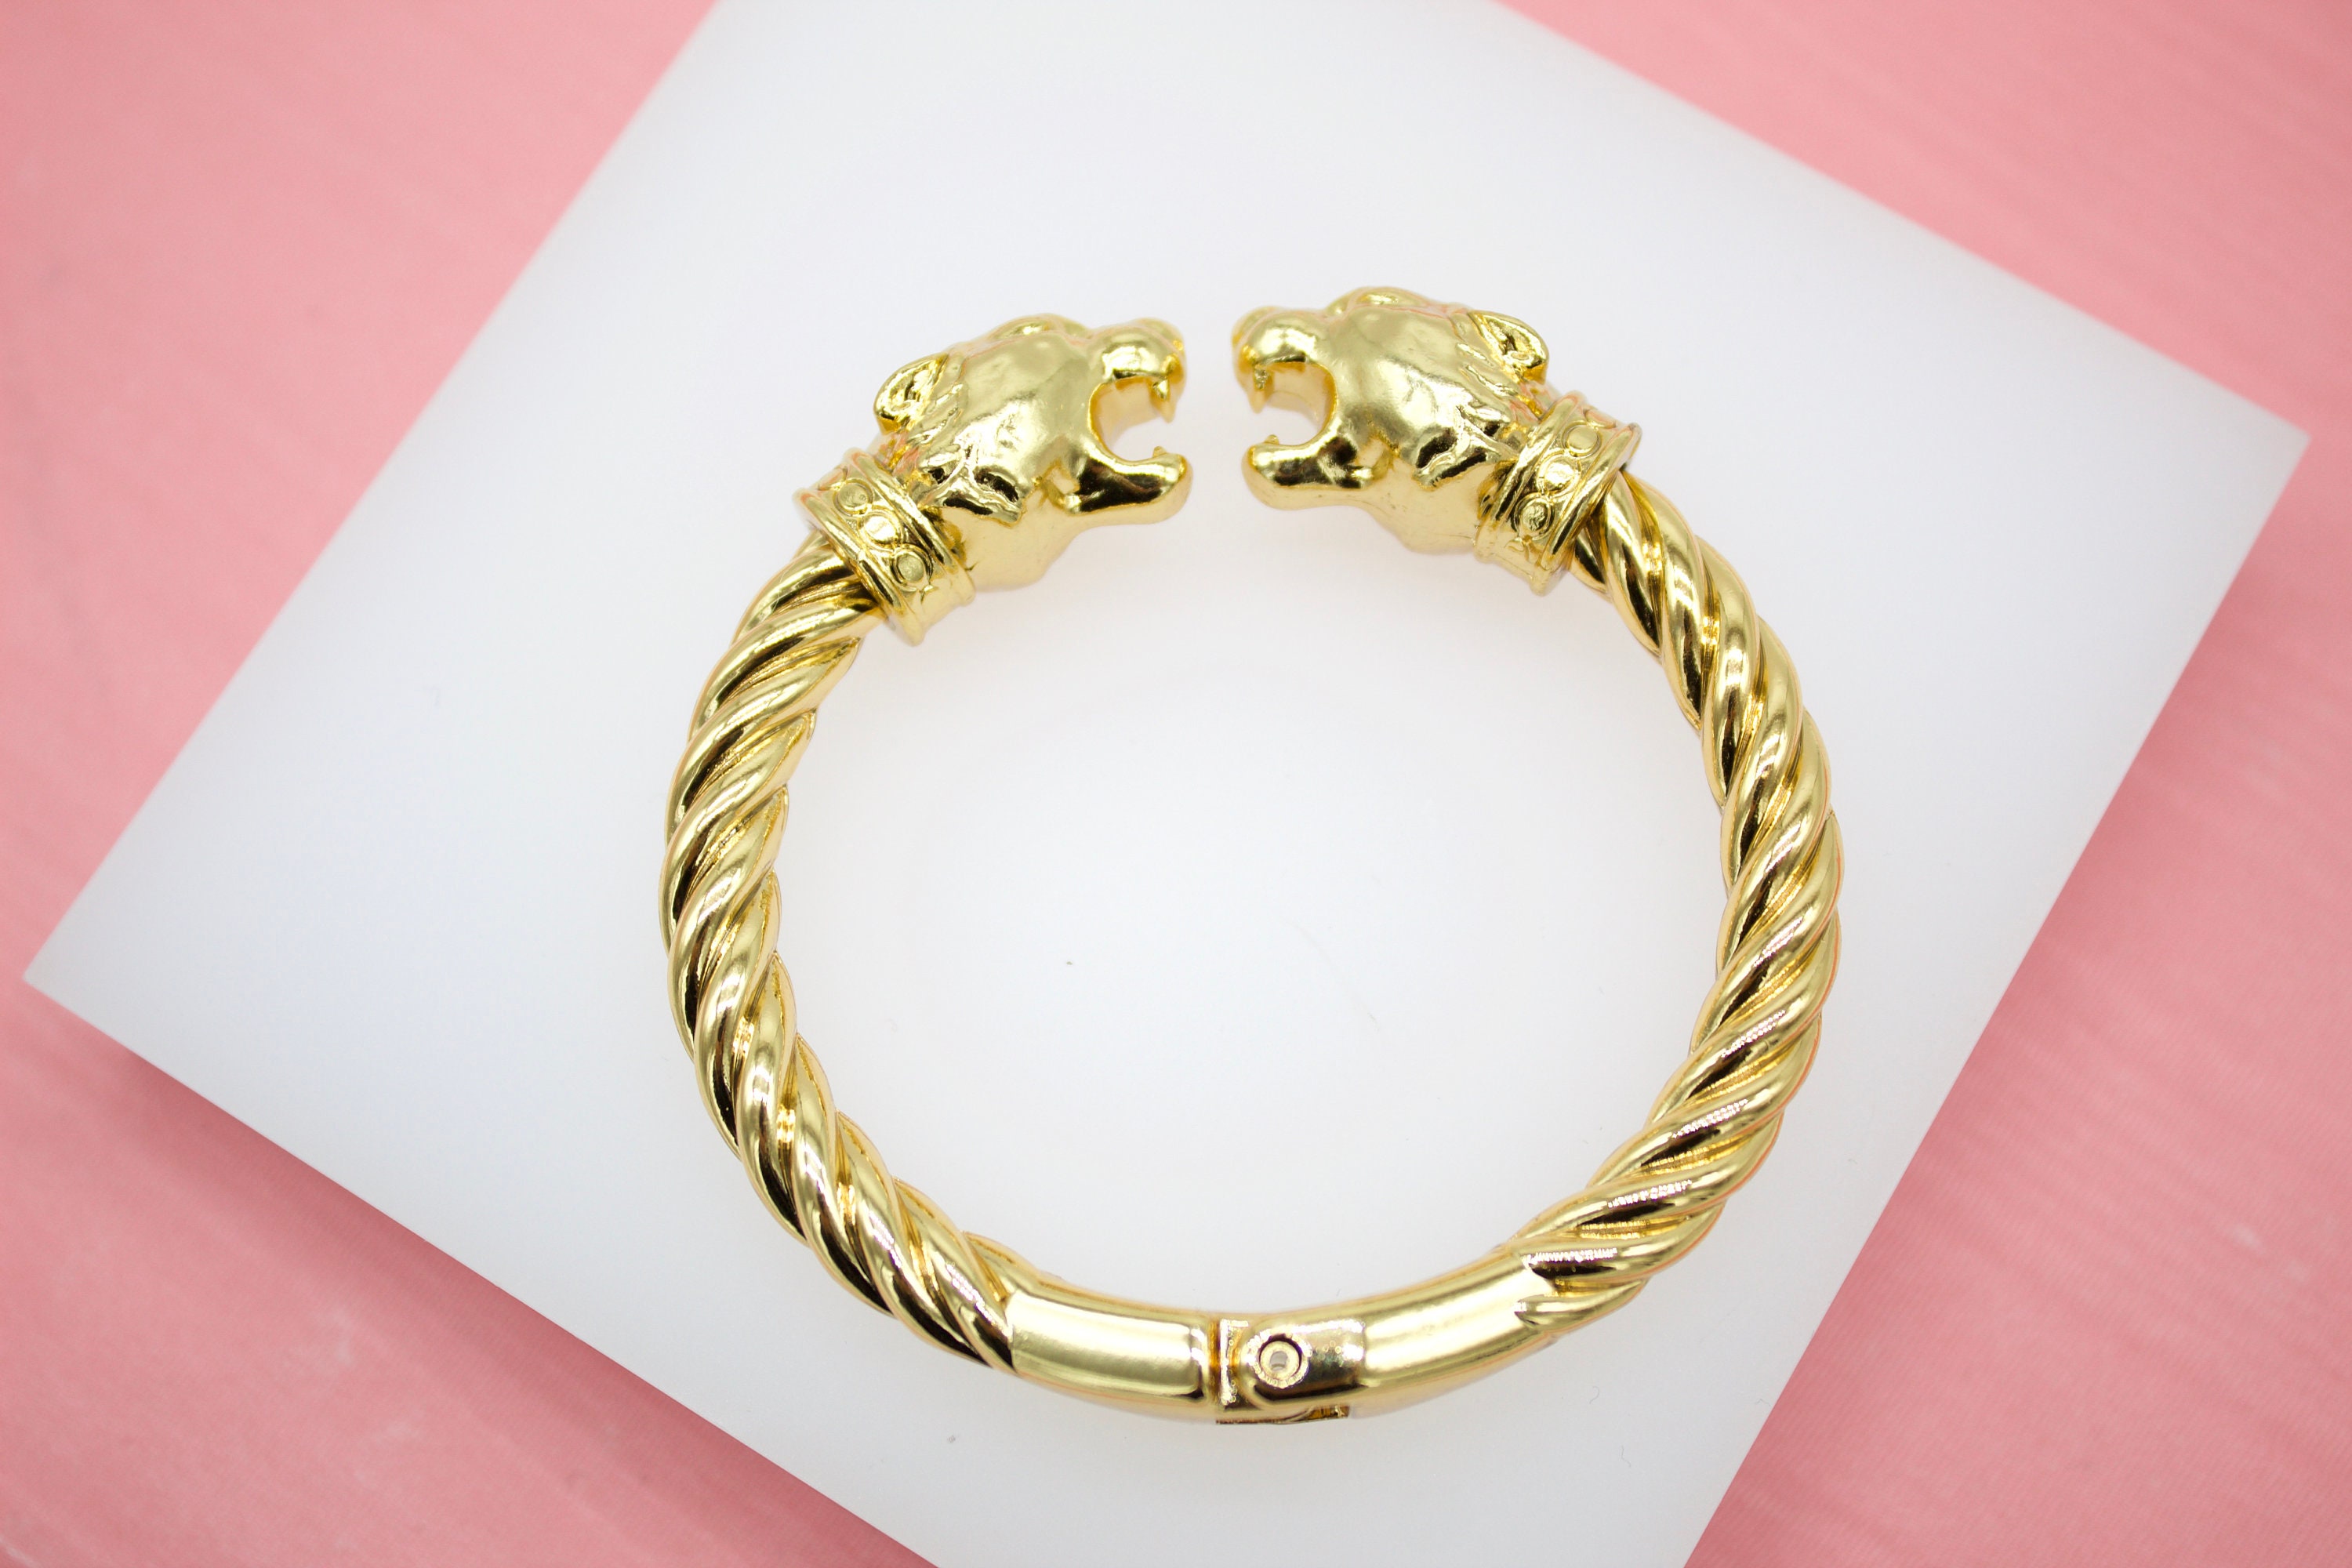 Buy a Mens Very Beautiful Lion Bracelet With Electroforming online shopping